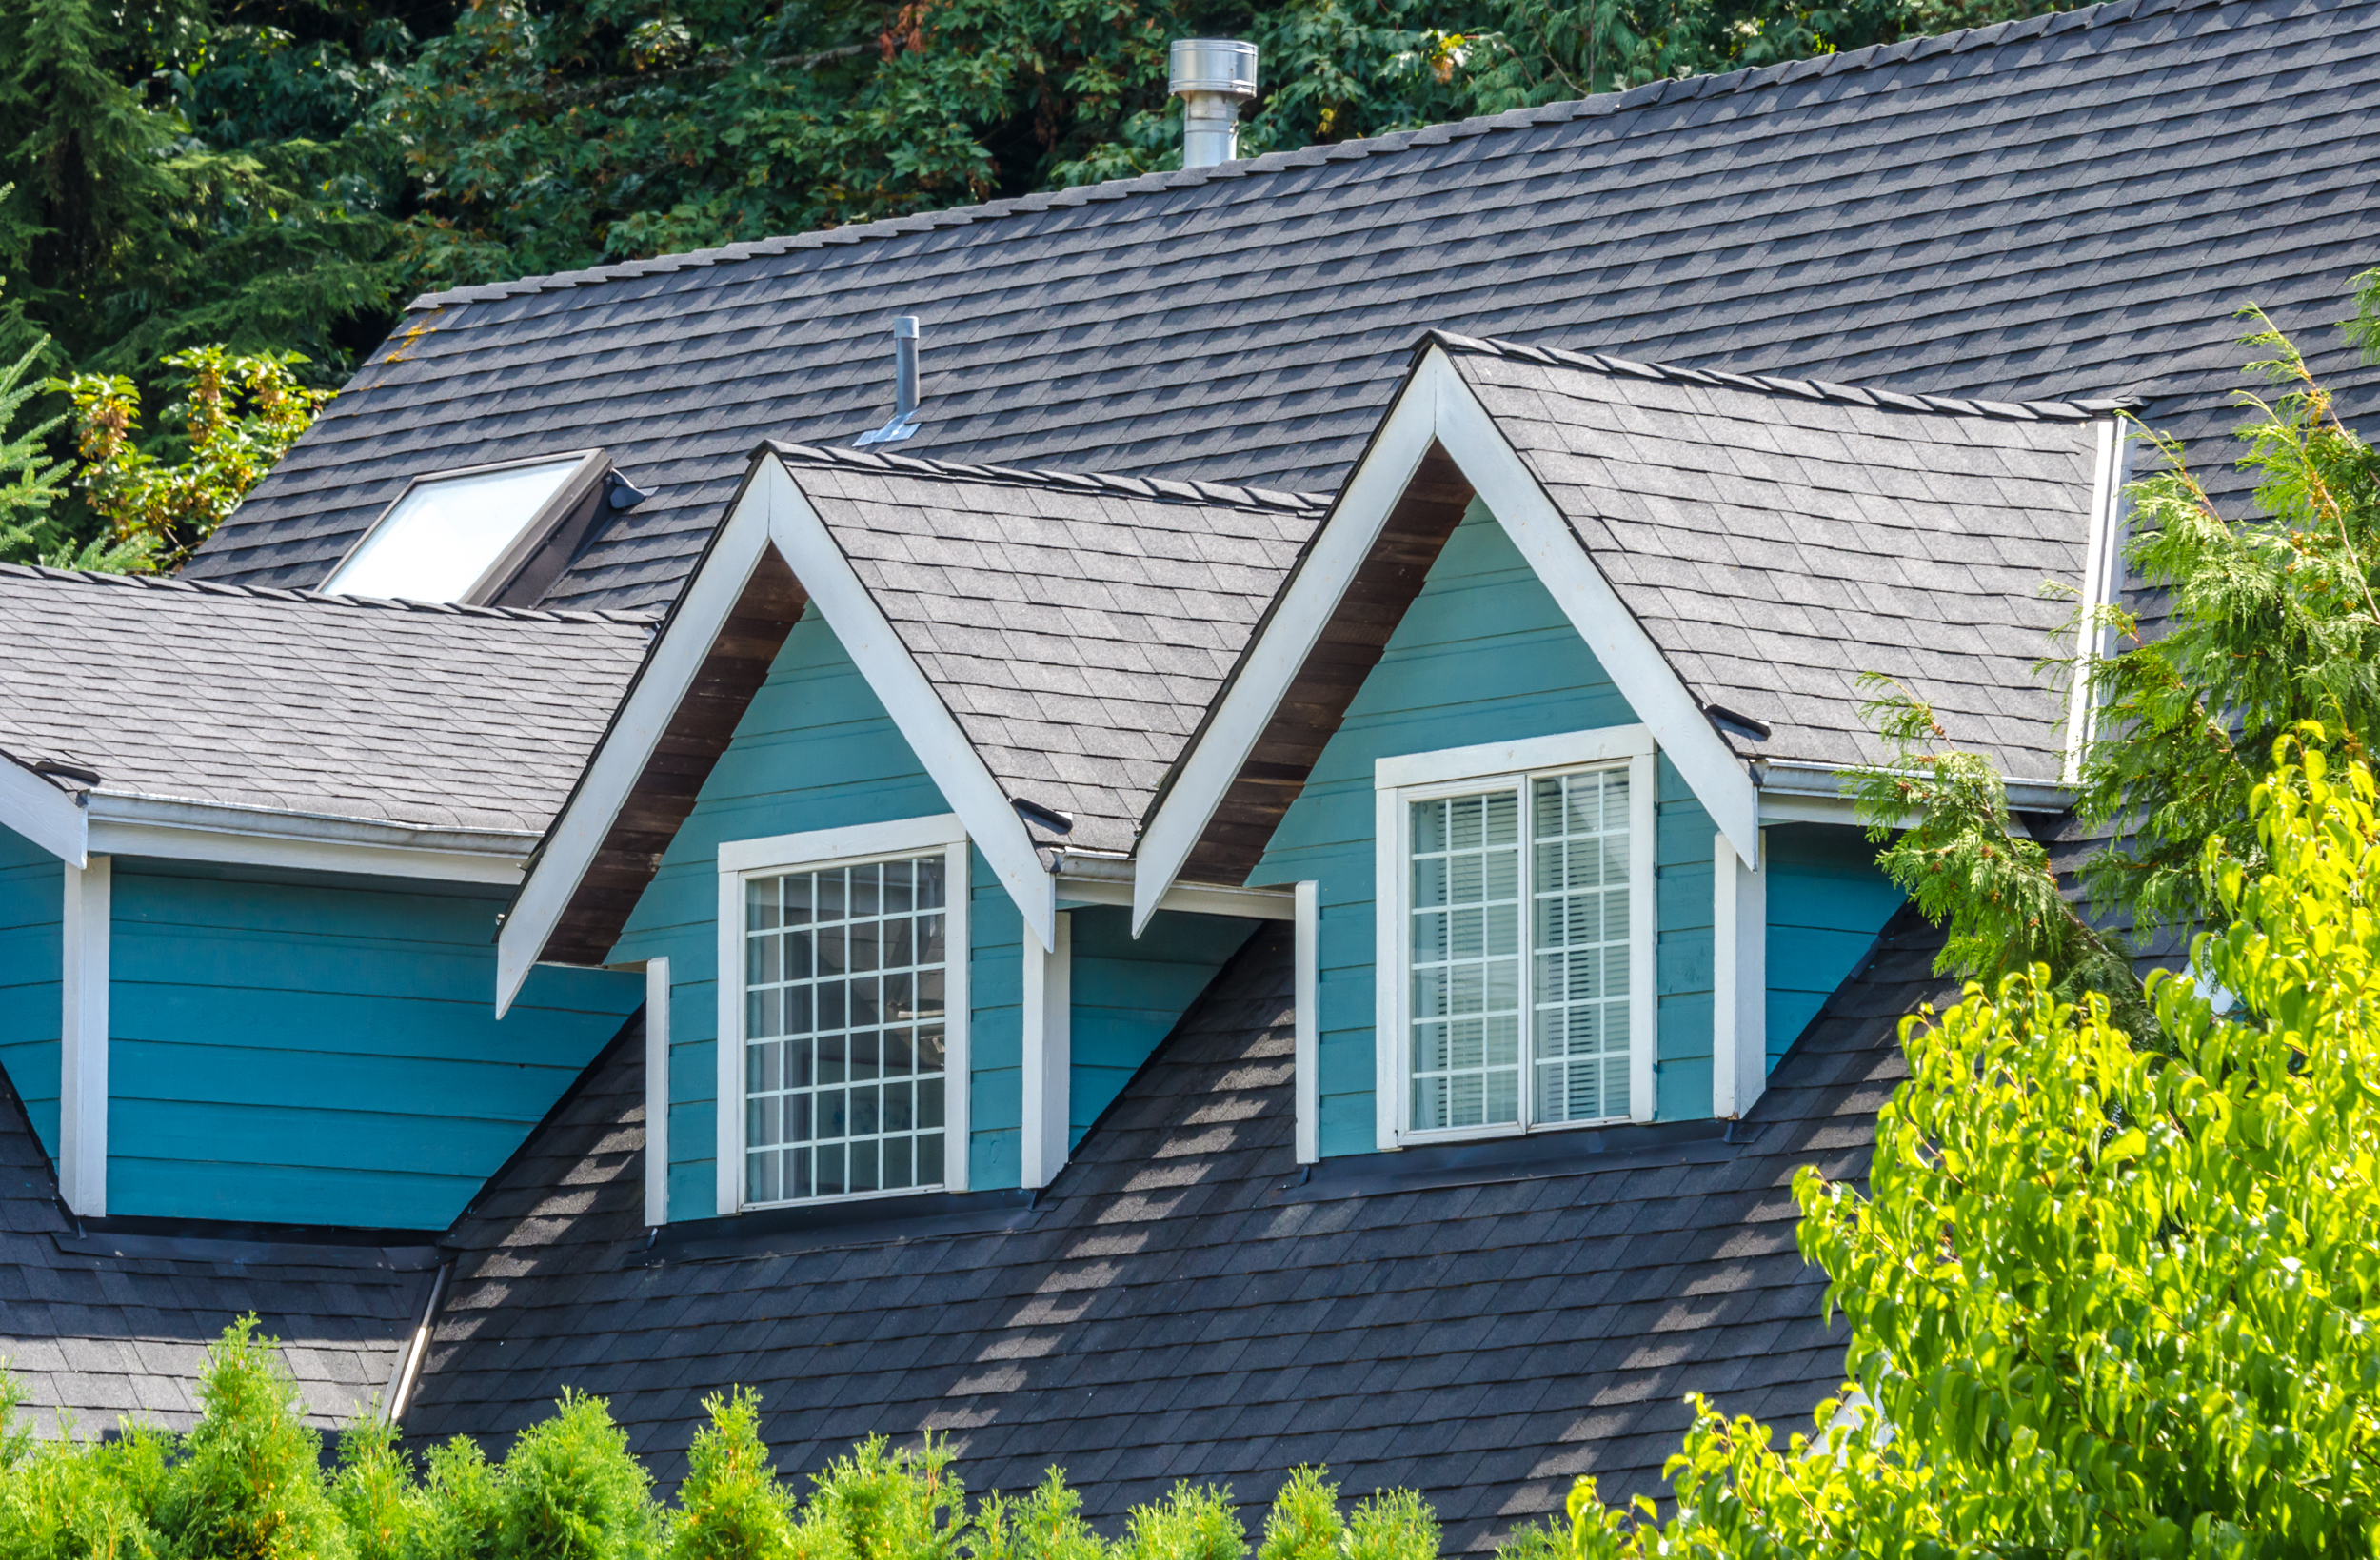 2 Important Things To Look For In A Roof When Buying A New Home